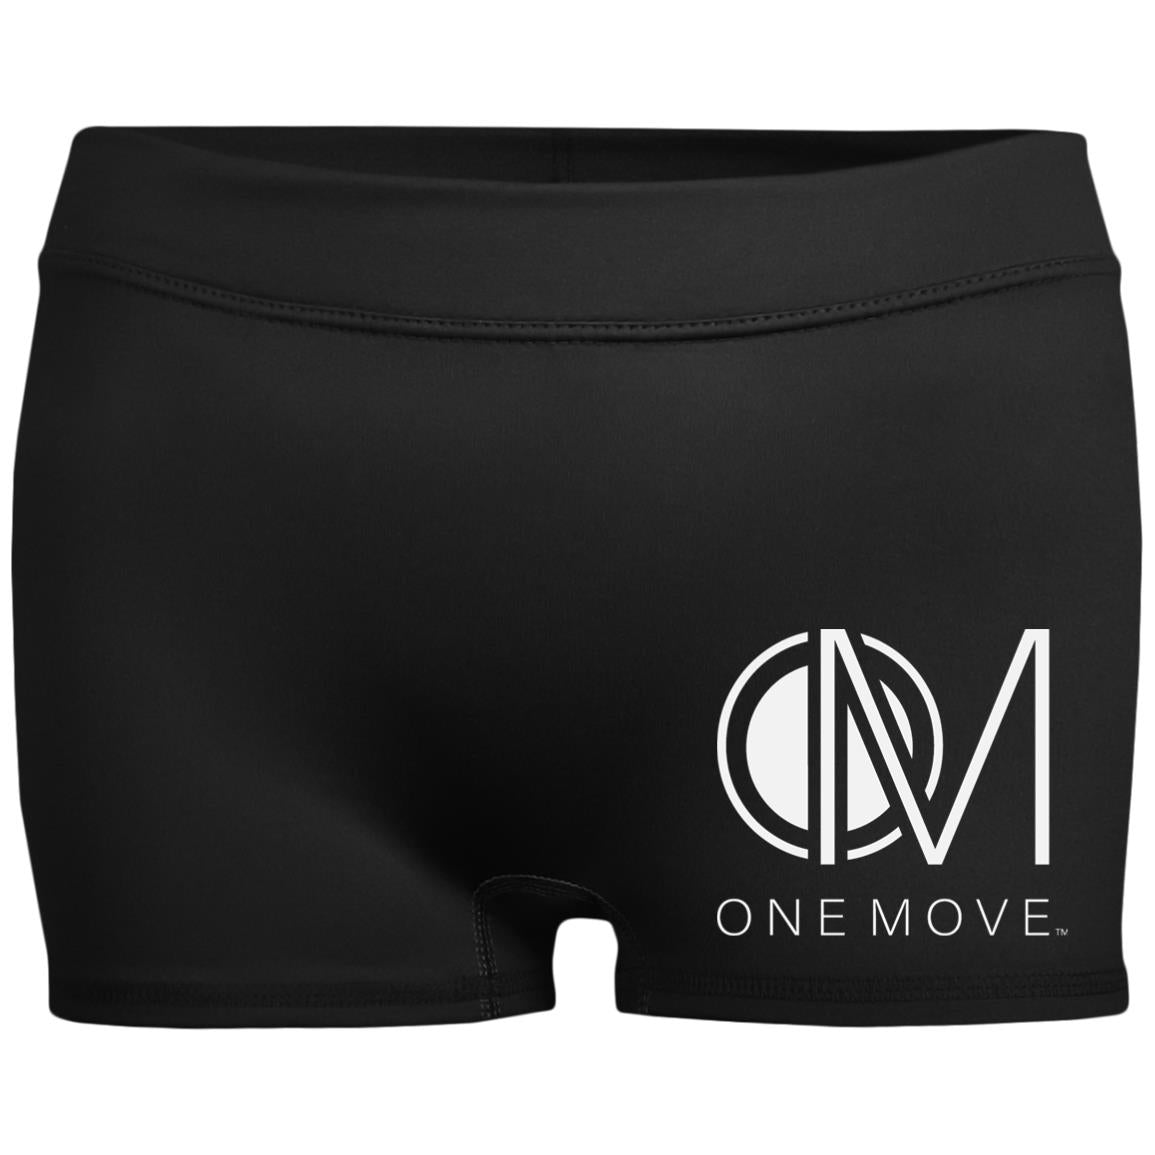 OM-wht Ladies' Fitted Moisture-Wicking 2.5 inch Inseam Shorts